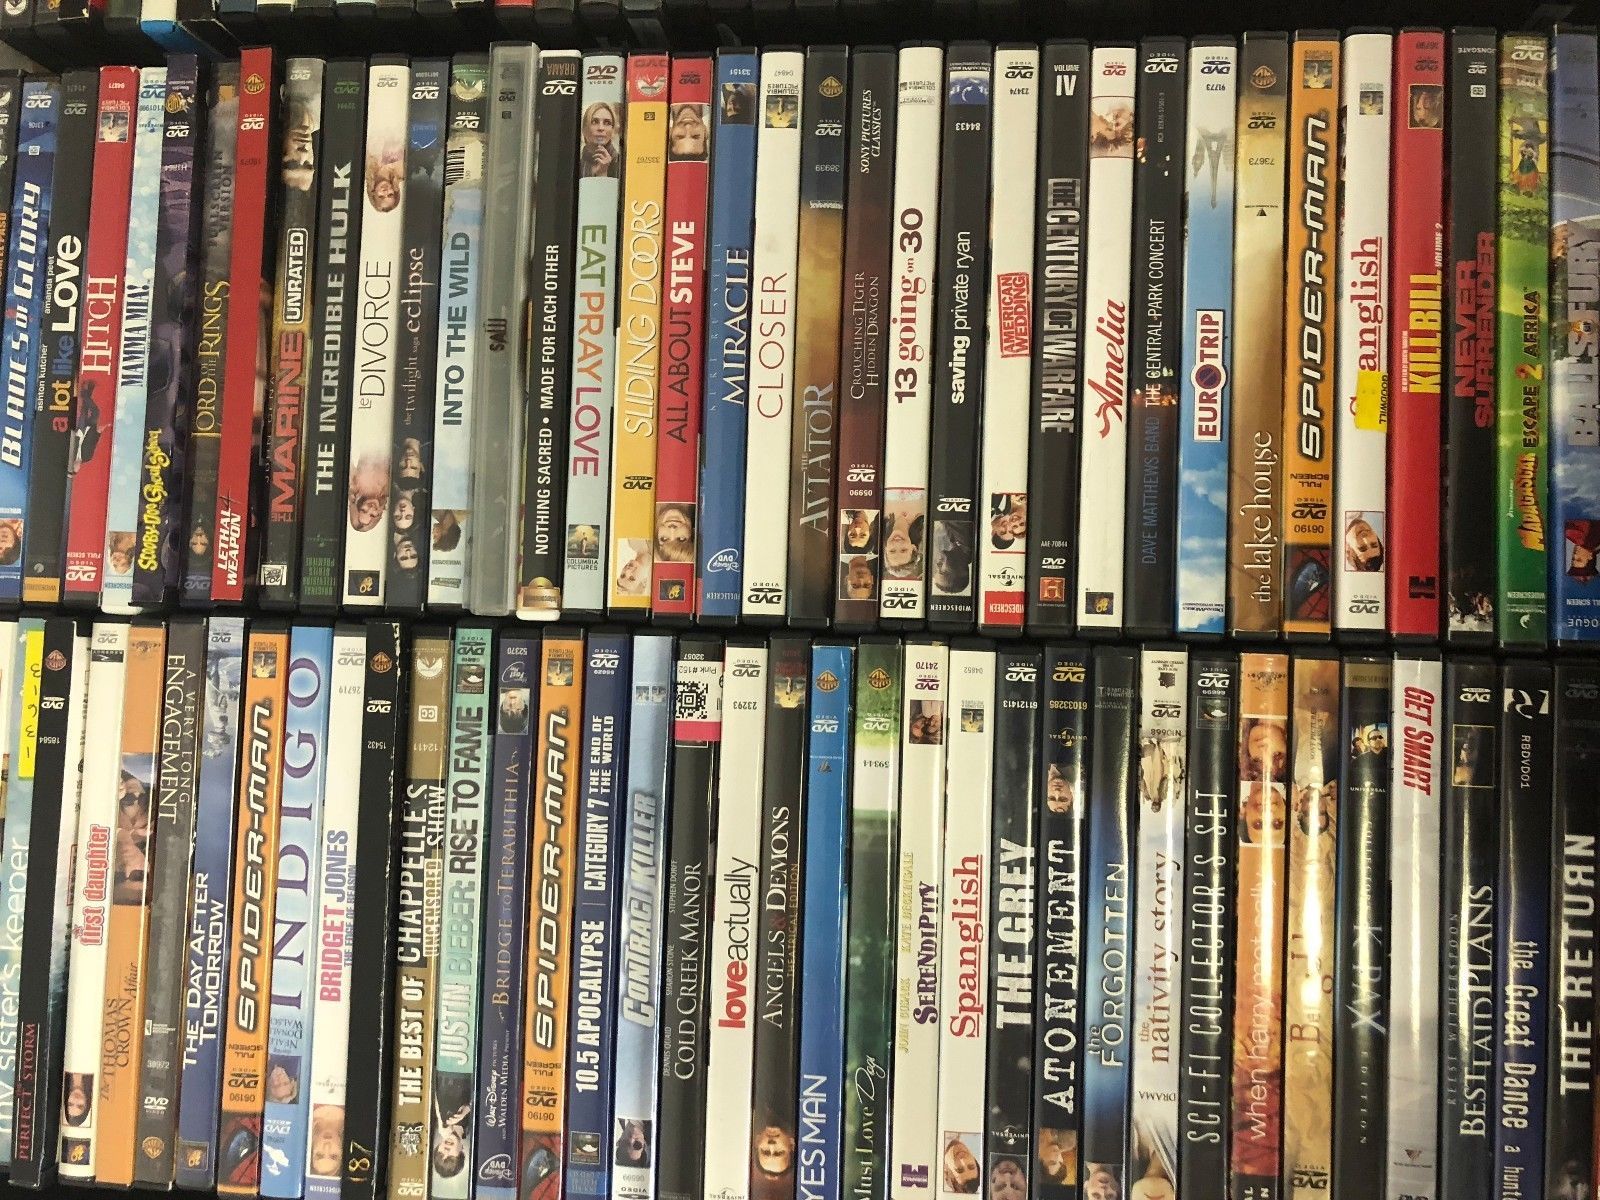 200 DVD Movies Lot Assorted Wholesale Bulk Used DVDs 200 ALL Movies $1K ...